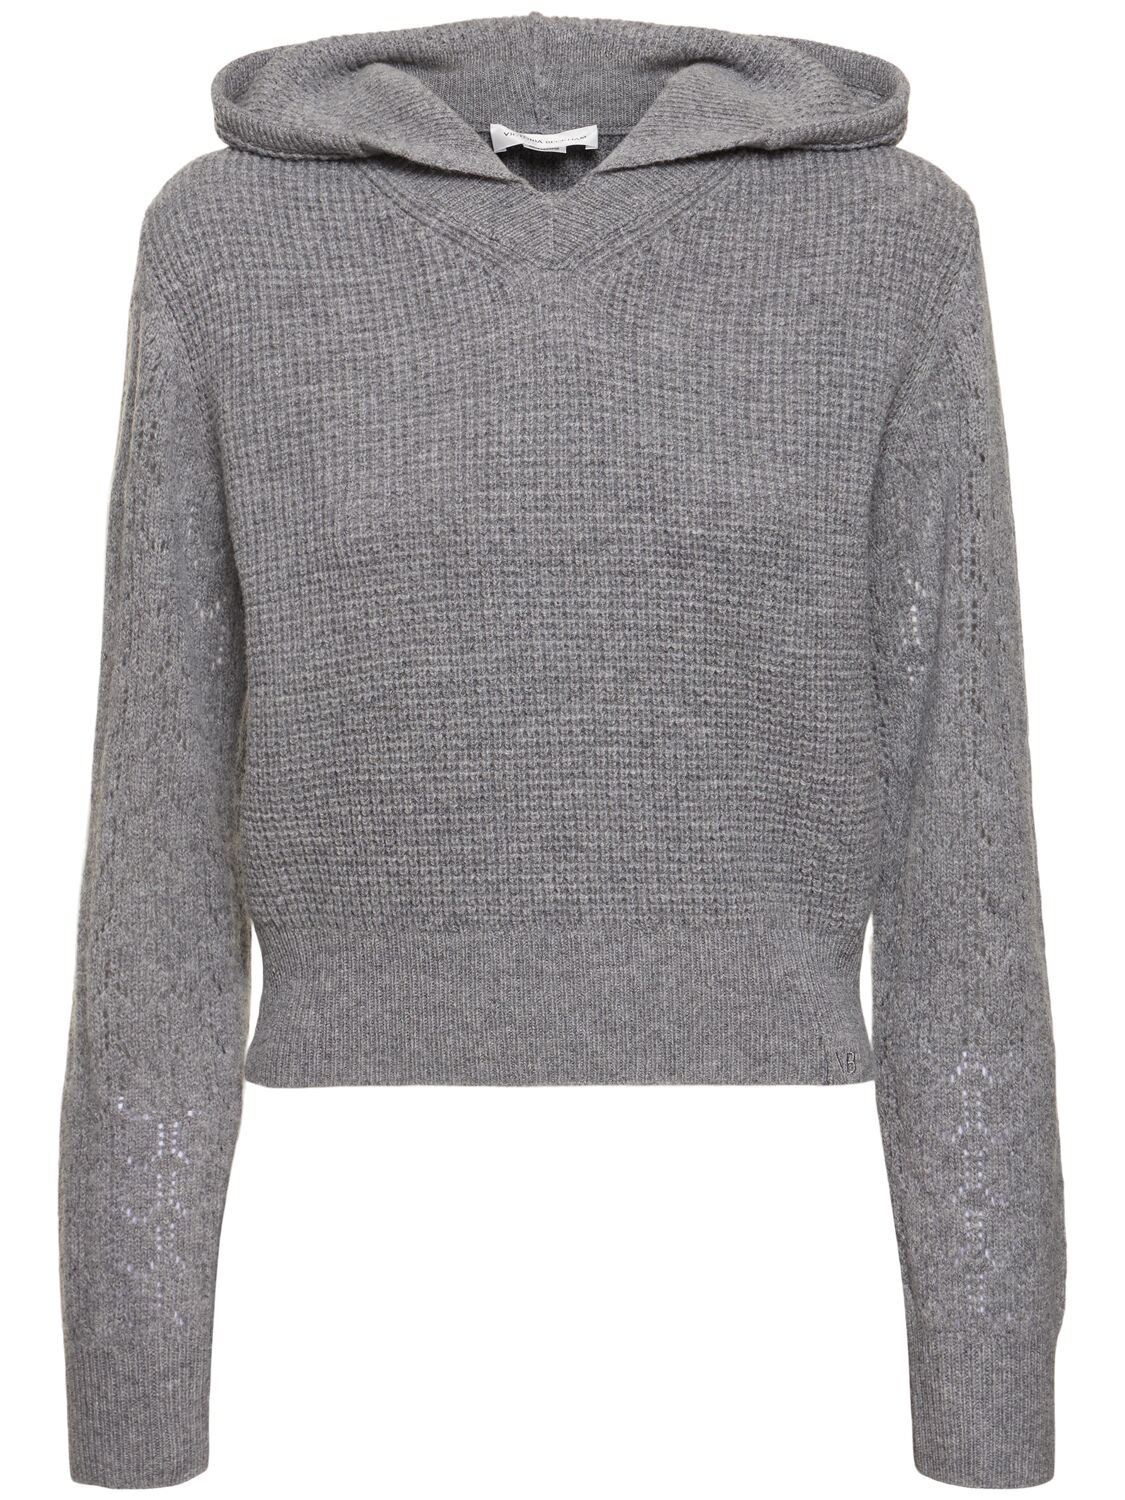 Victoria Beckham Hooded Pointelle Knit Wool Sweater In Grey